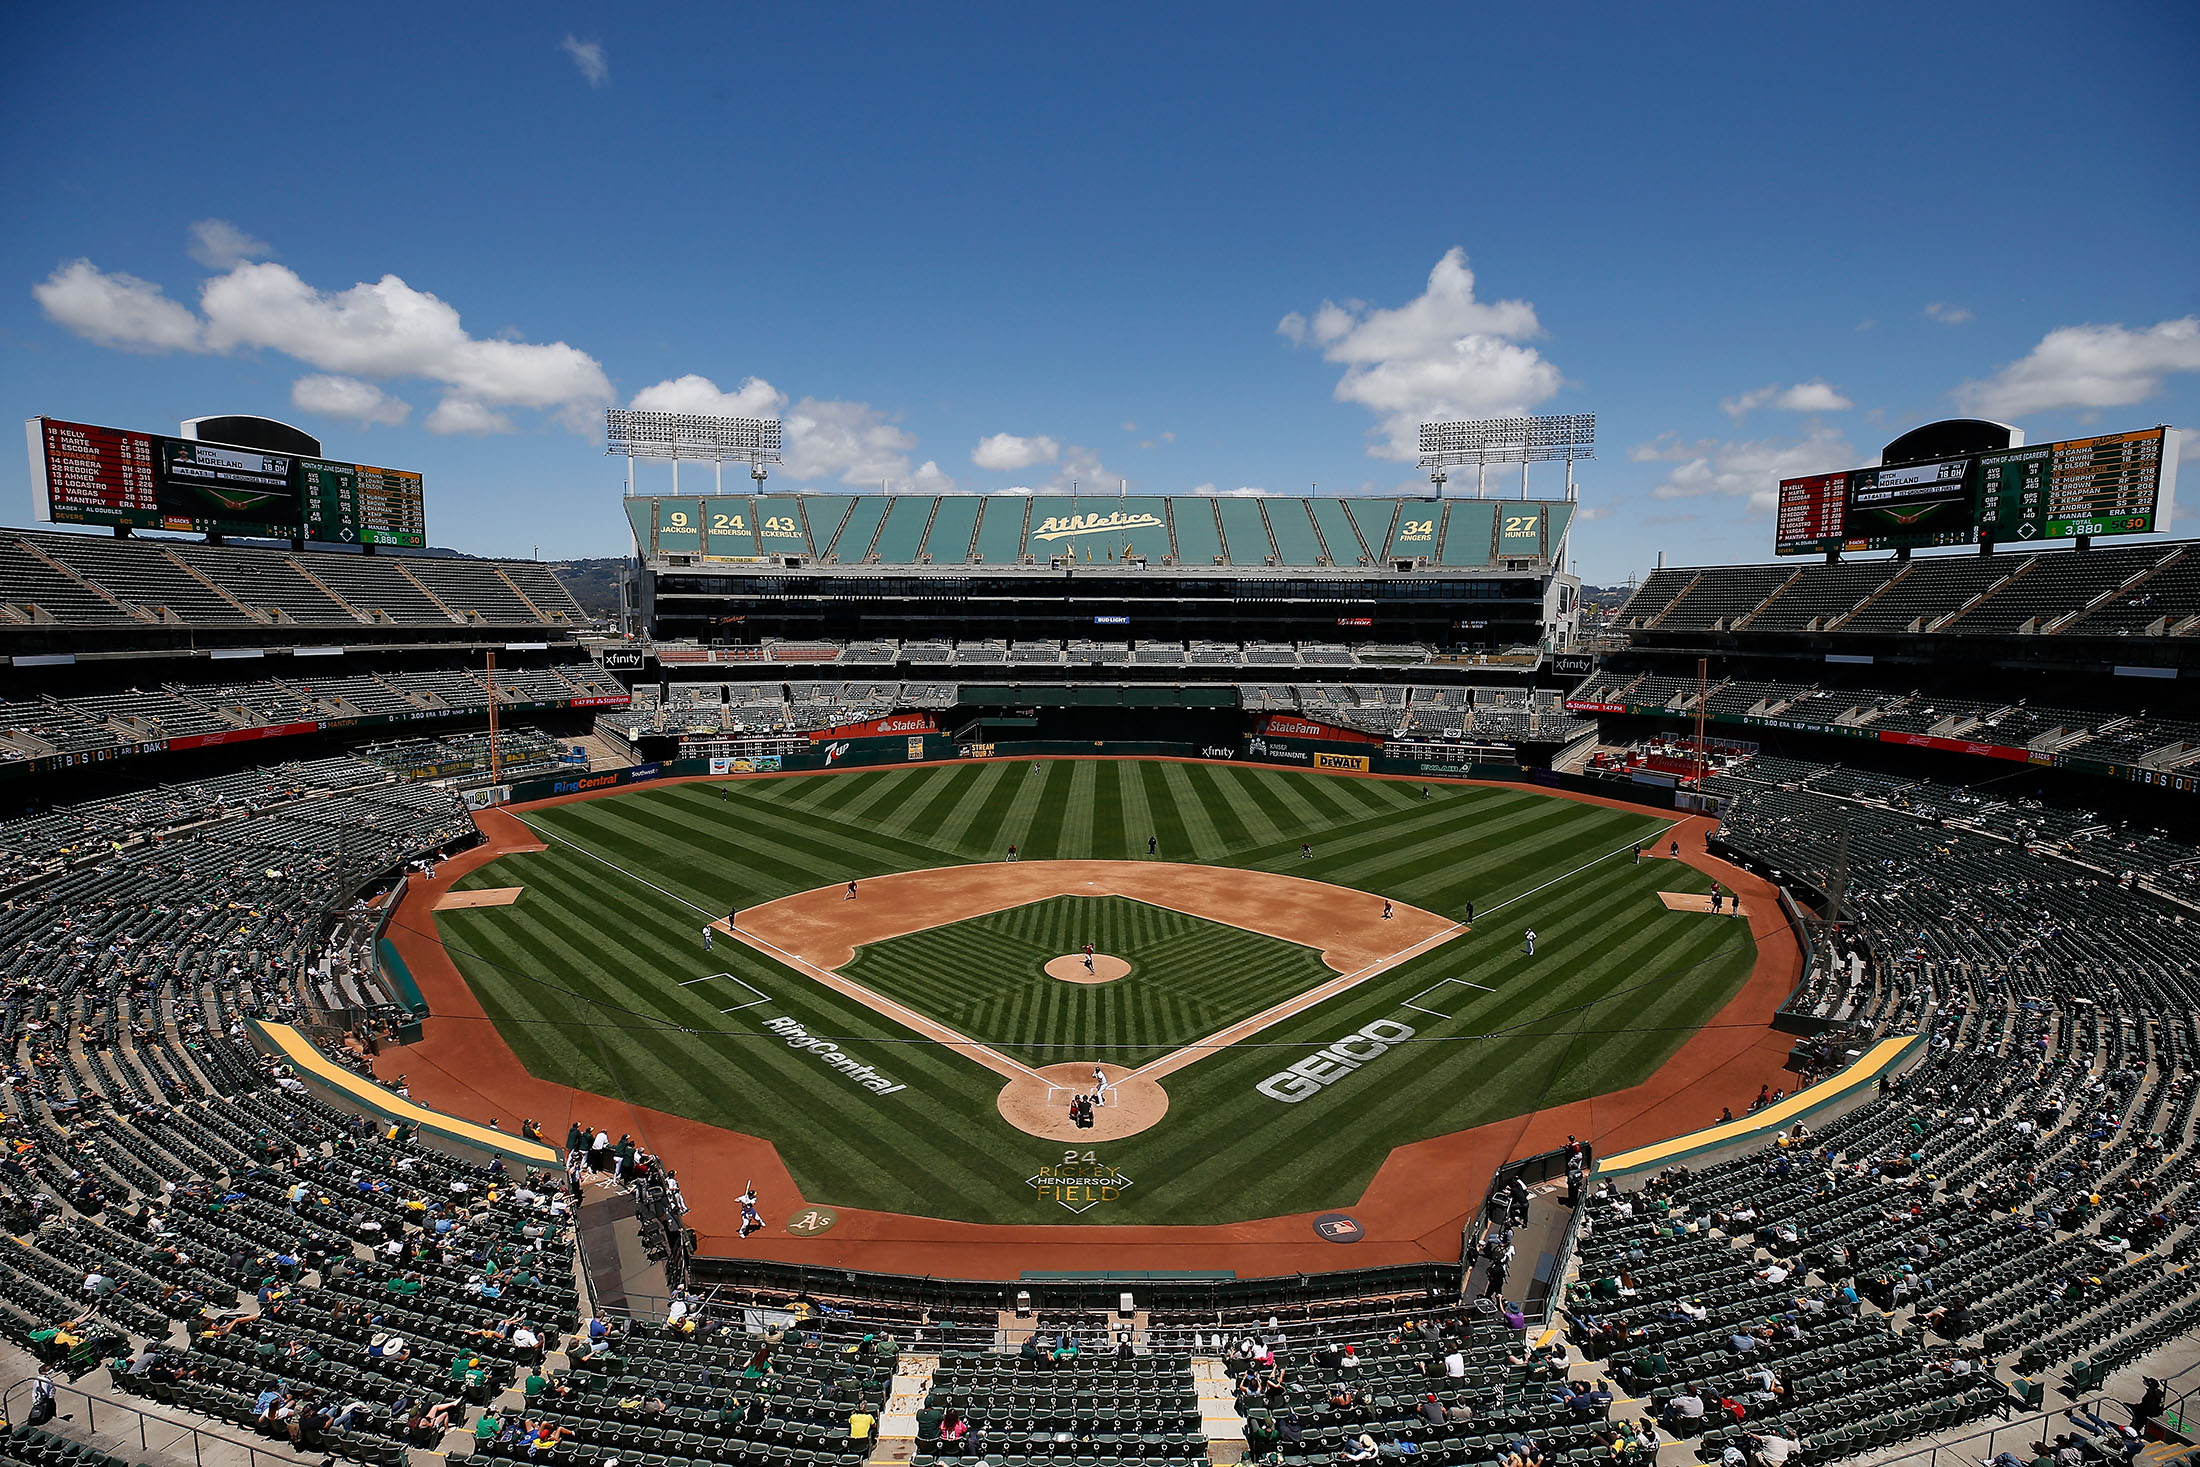 Oakland to Athletics: Agree to Stay If You Want a New Ballpark - Bloomberg